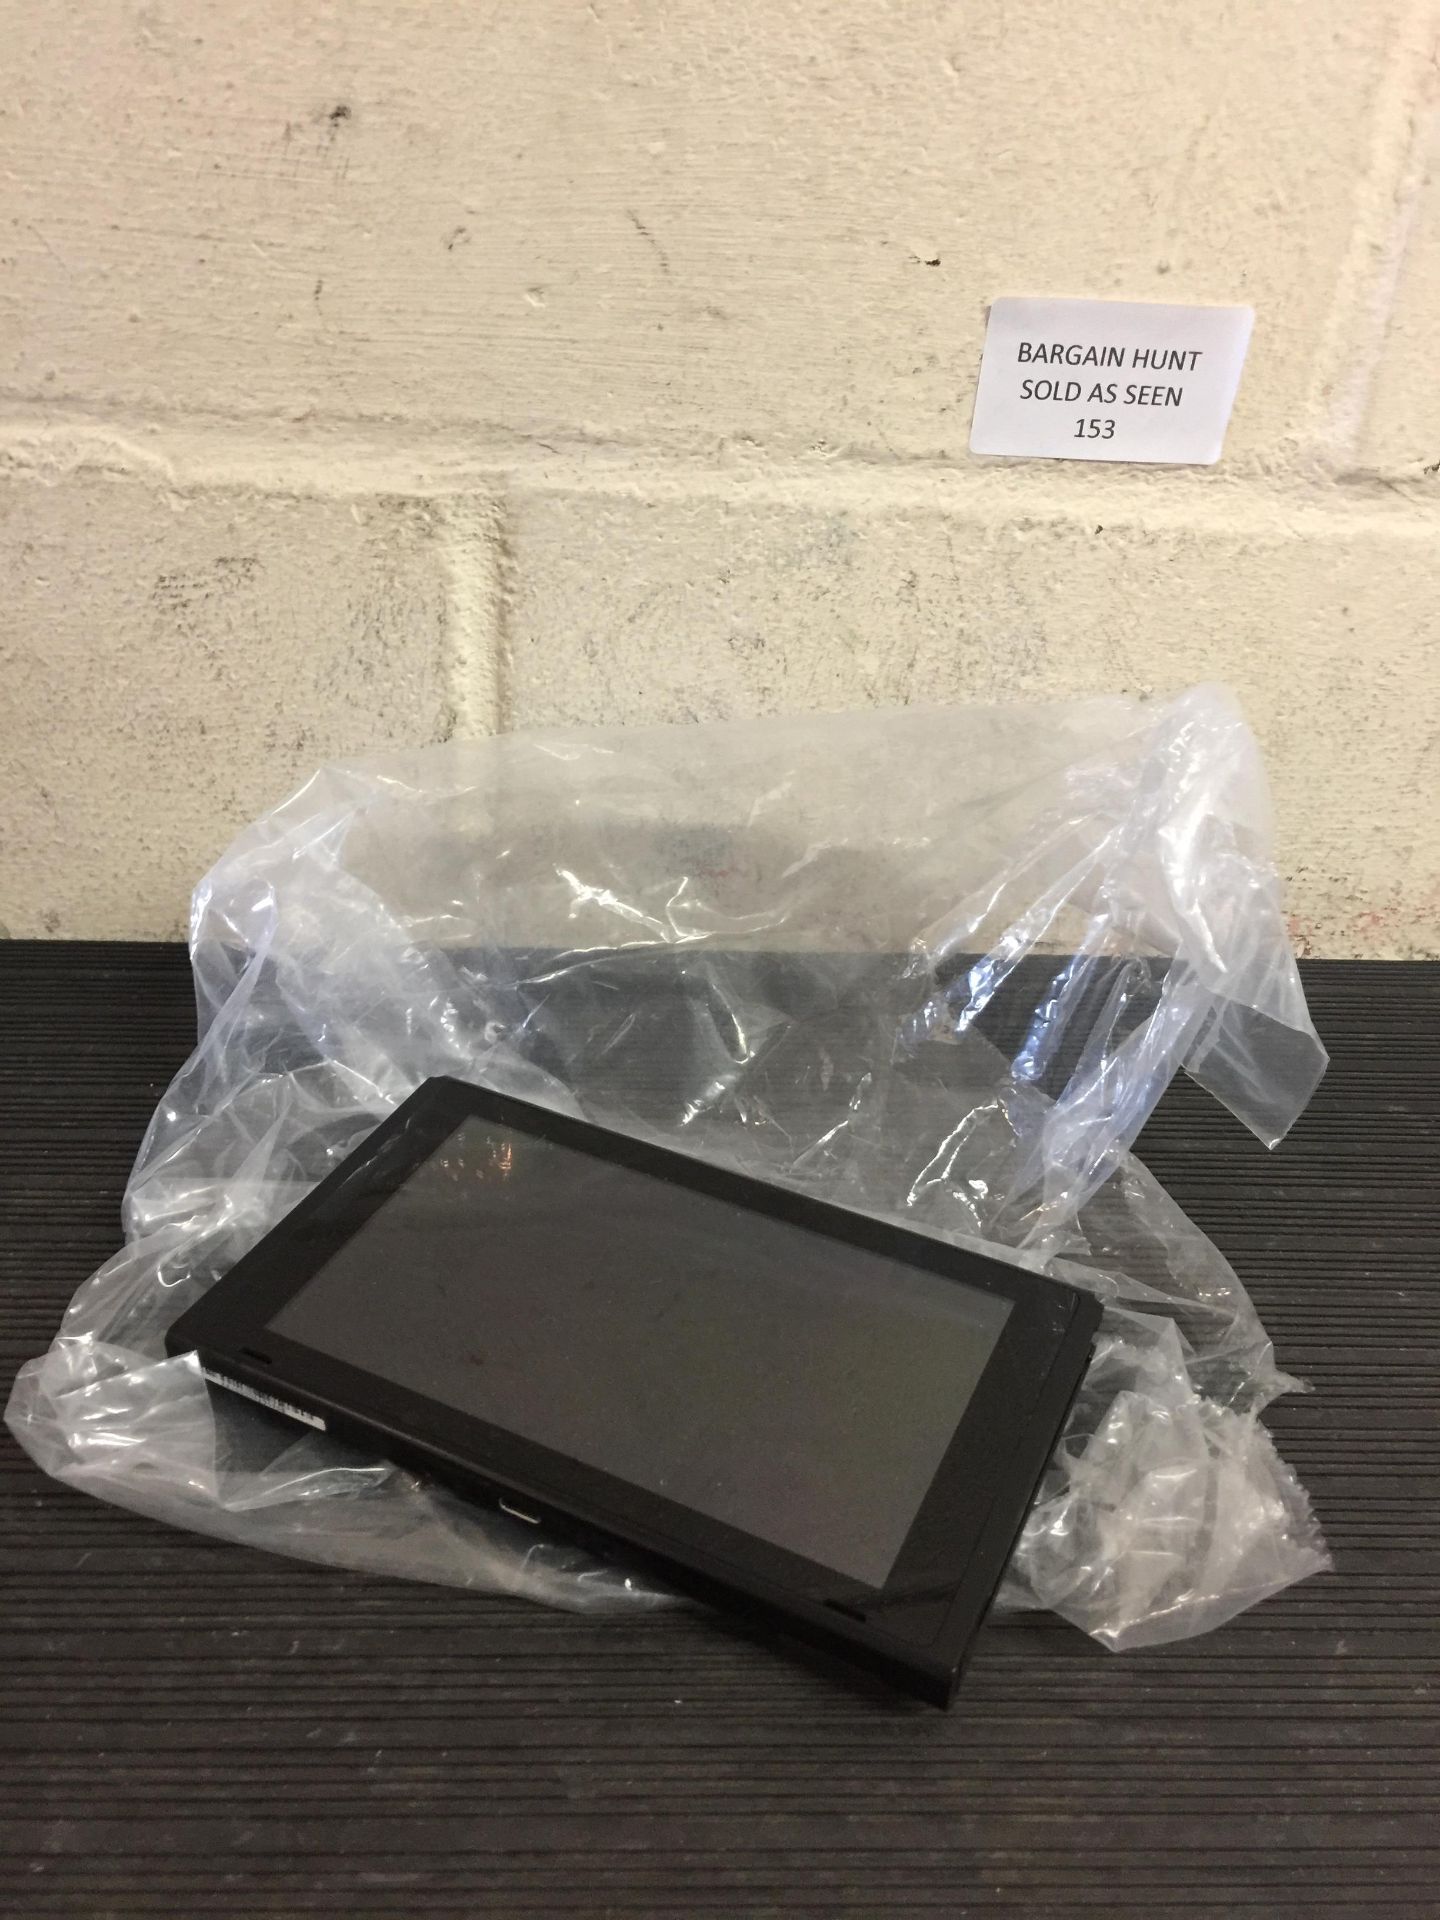 Nintendo Switch Console (does not power on)